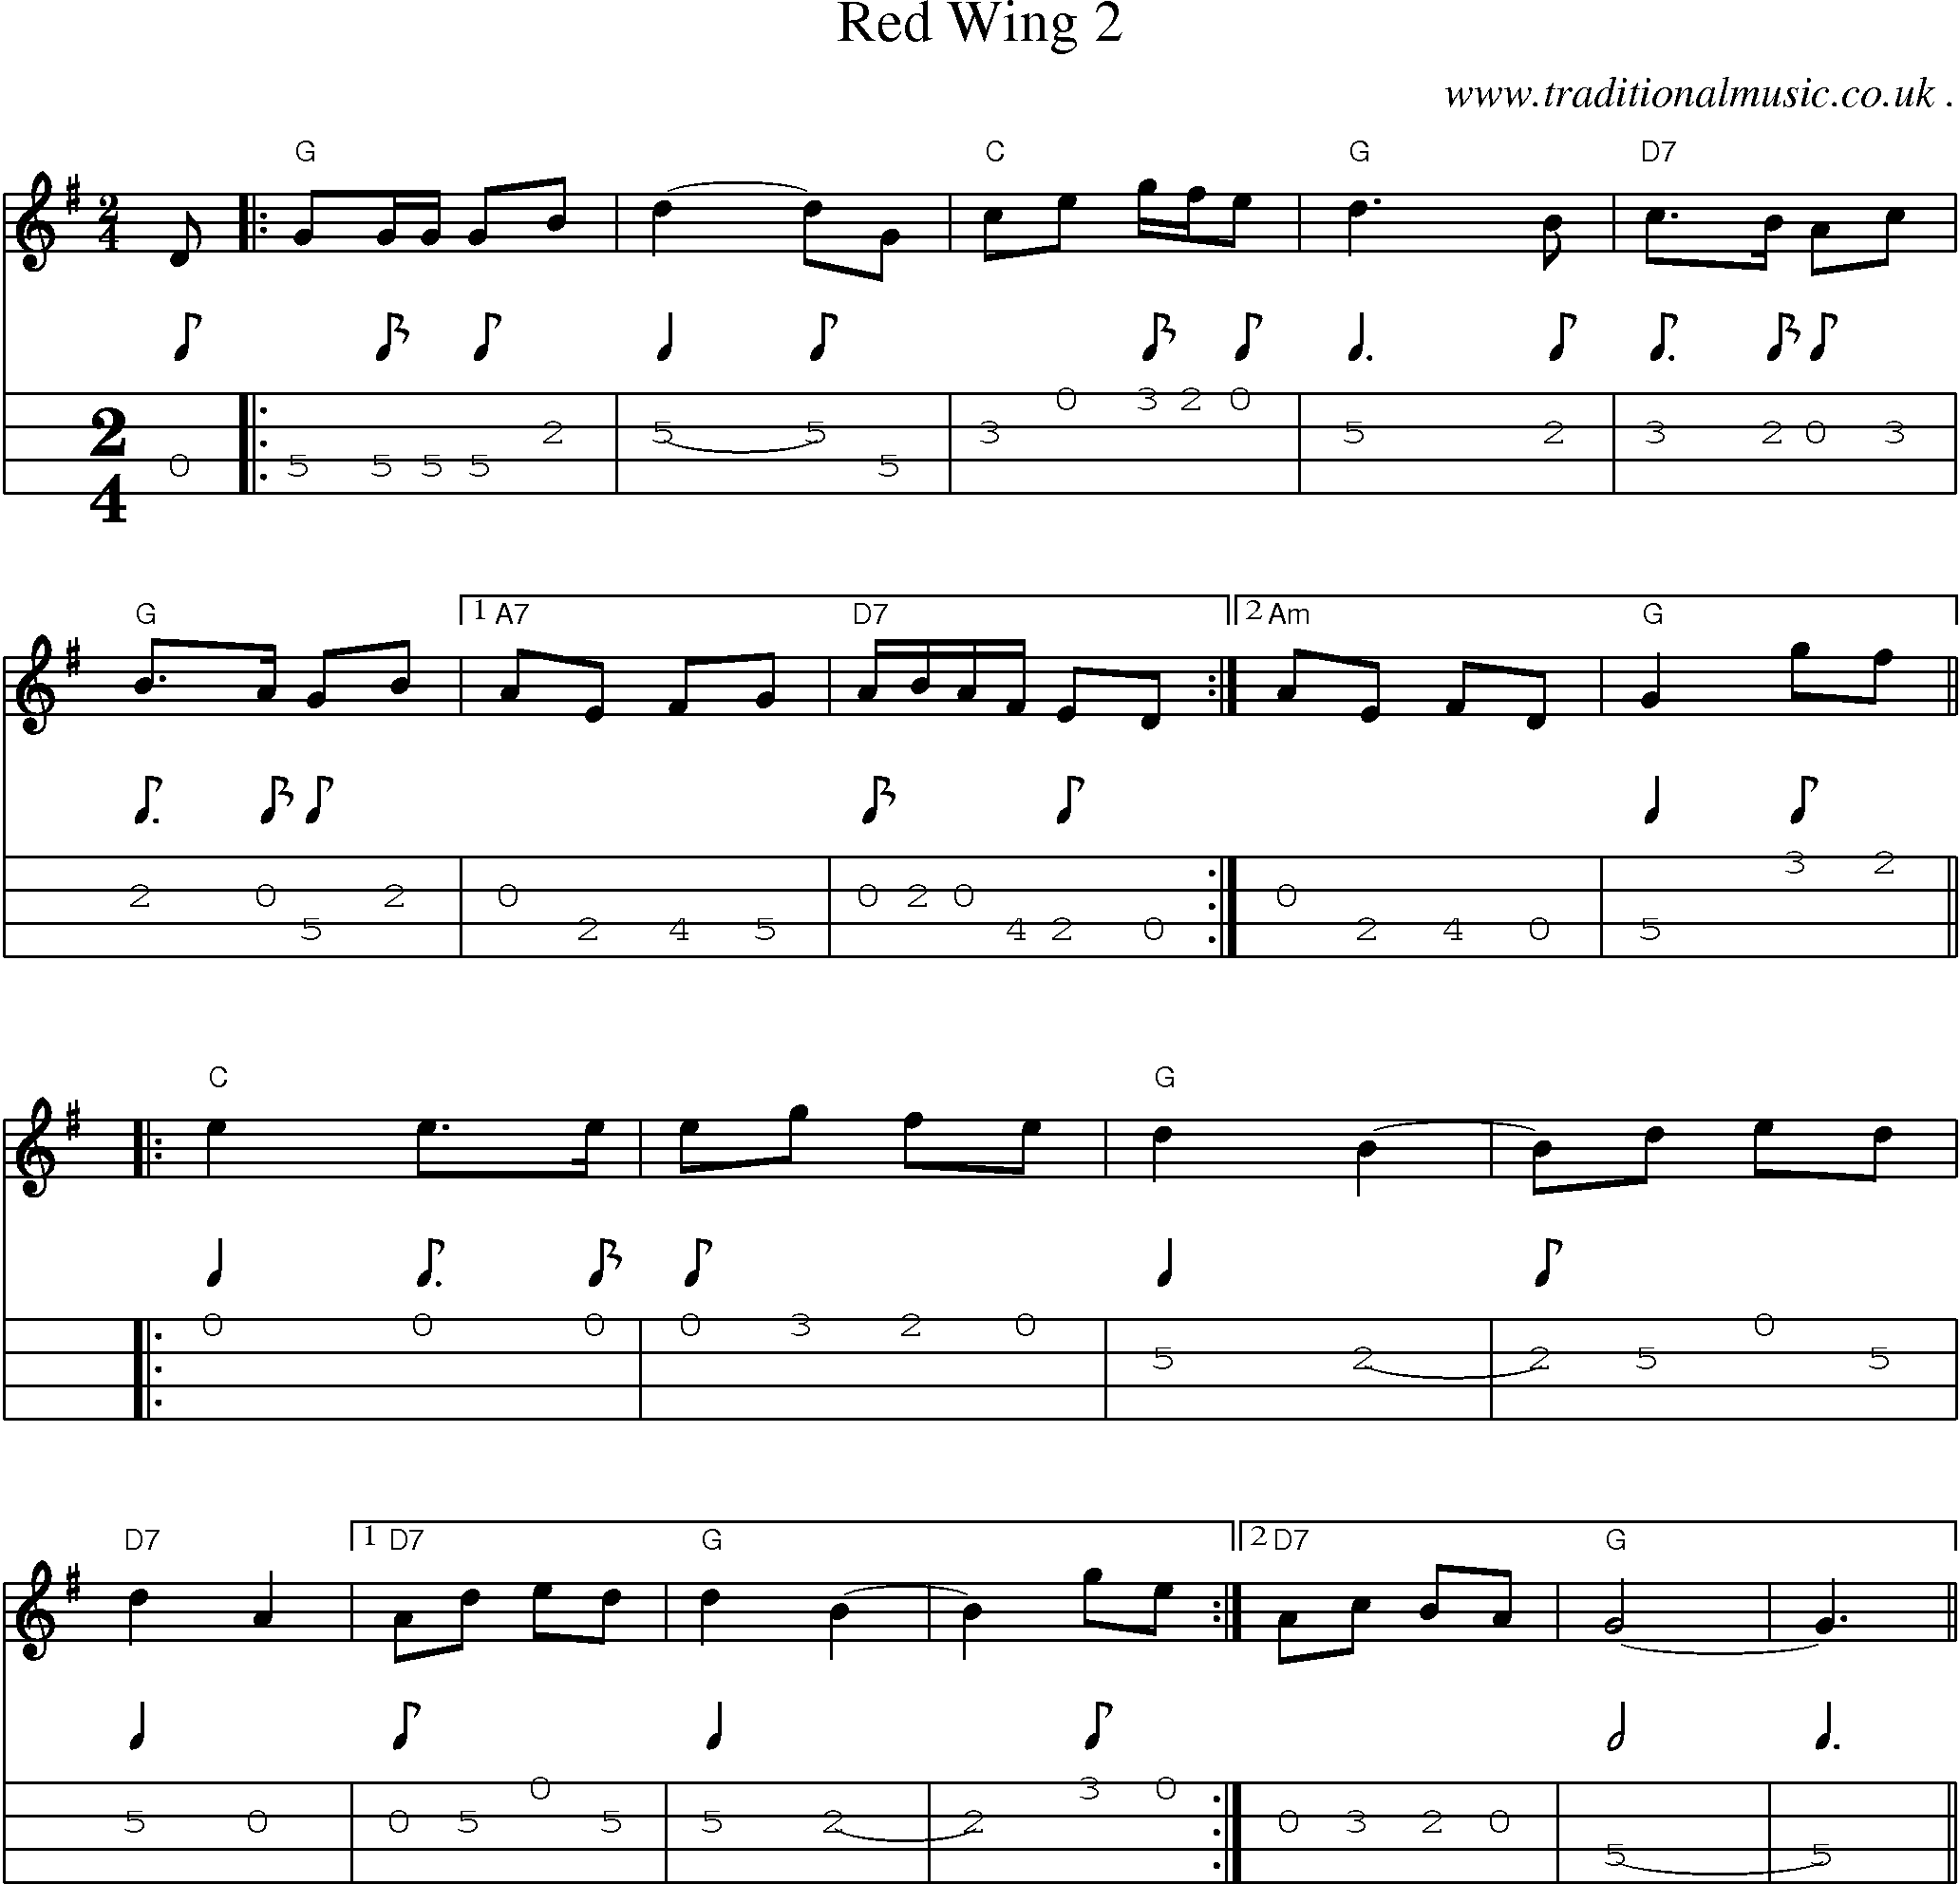 Music Score and Mandolin Tabs for Red Wing 2